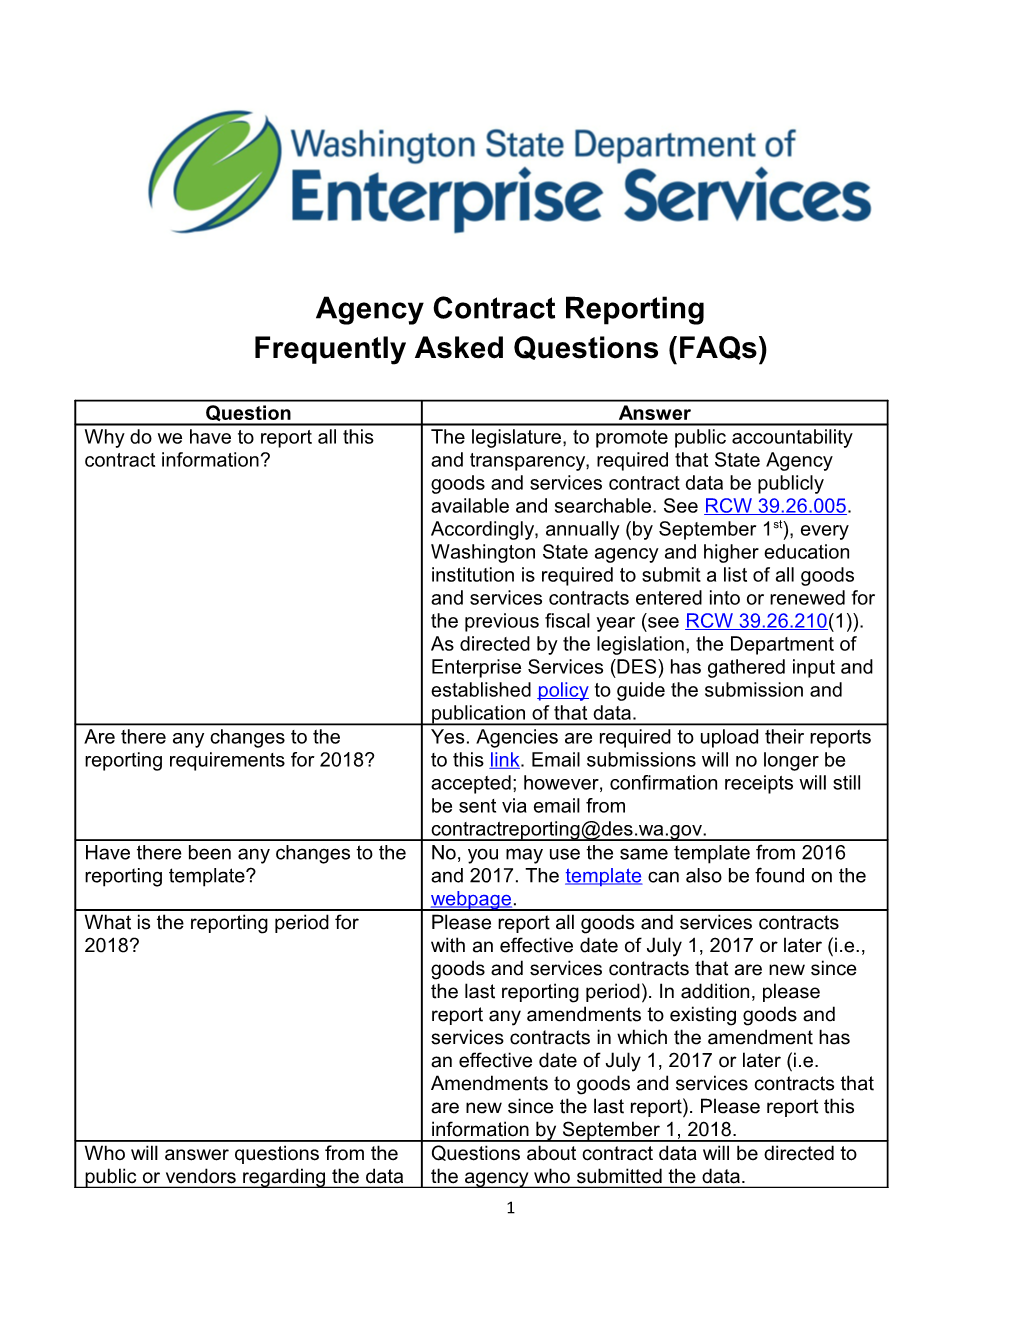 Agency Contract Reporting Frequently Asked Questions